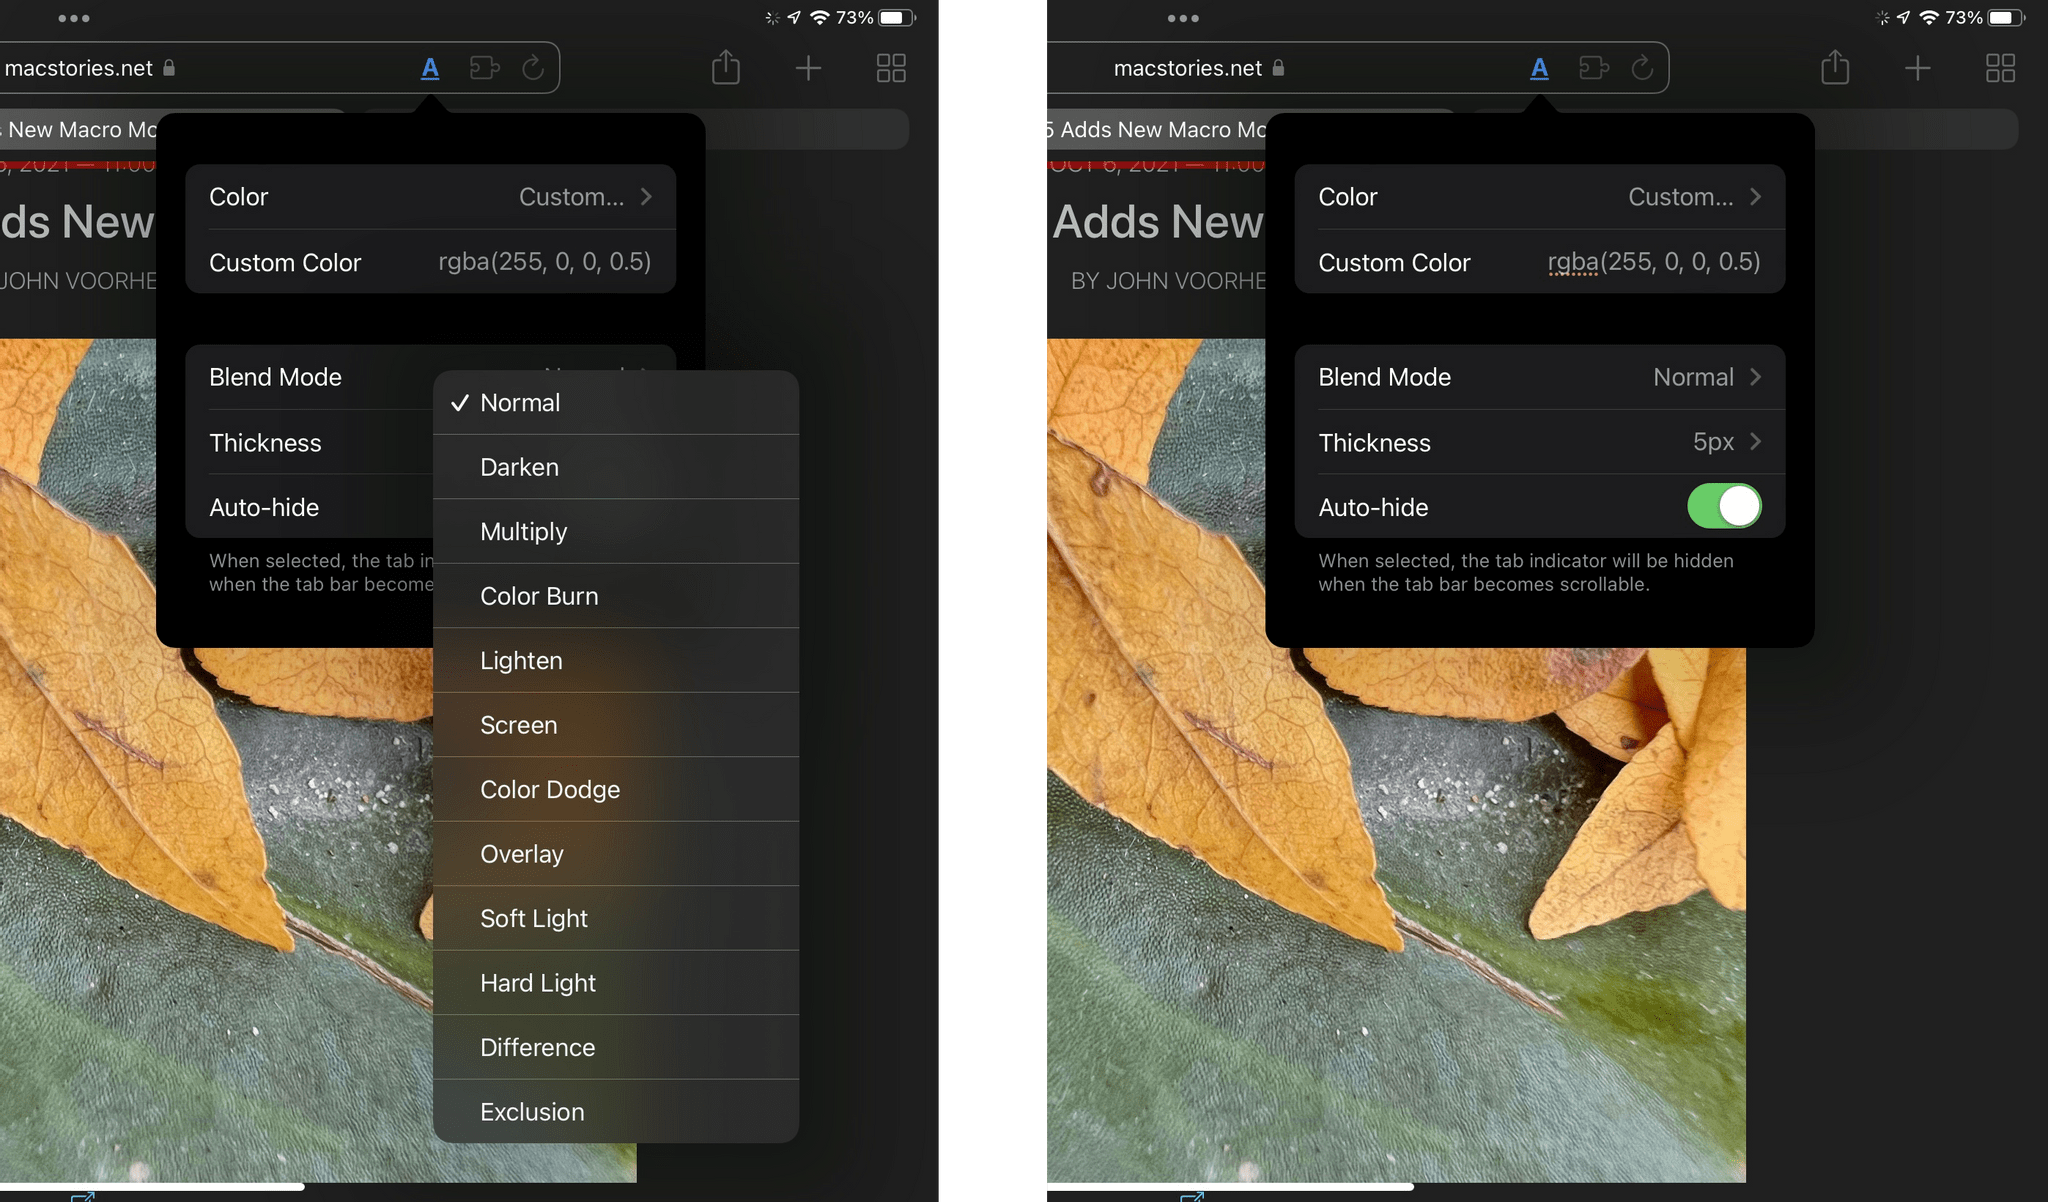 ActiveTab has added new Blend Modes and custom colors to the app too.